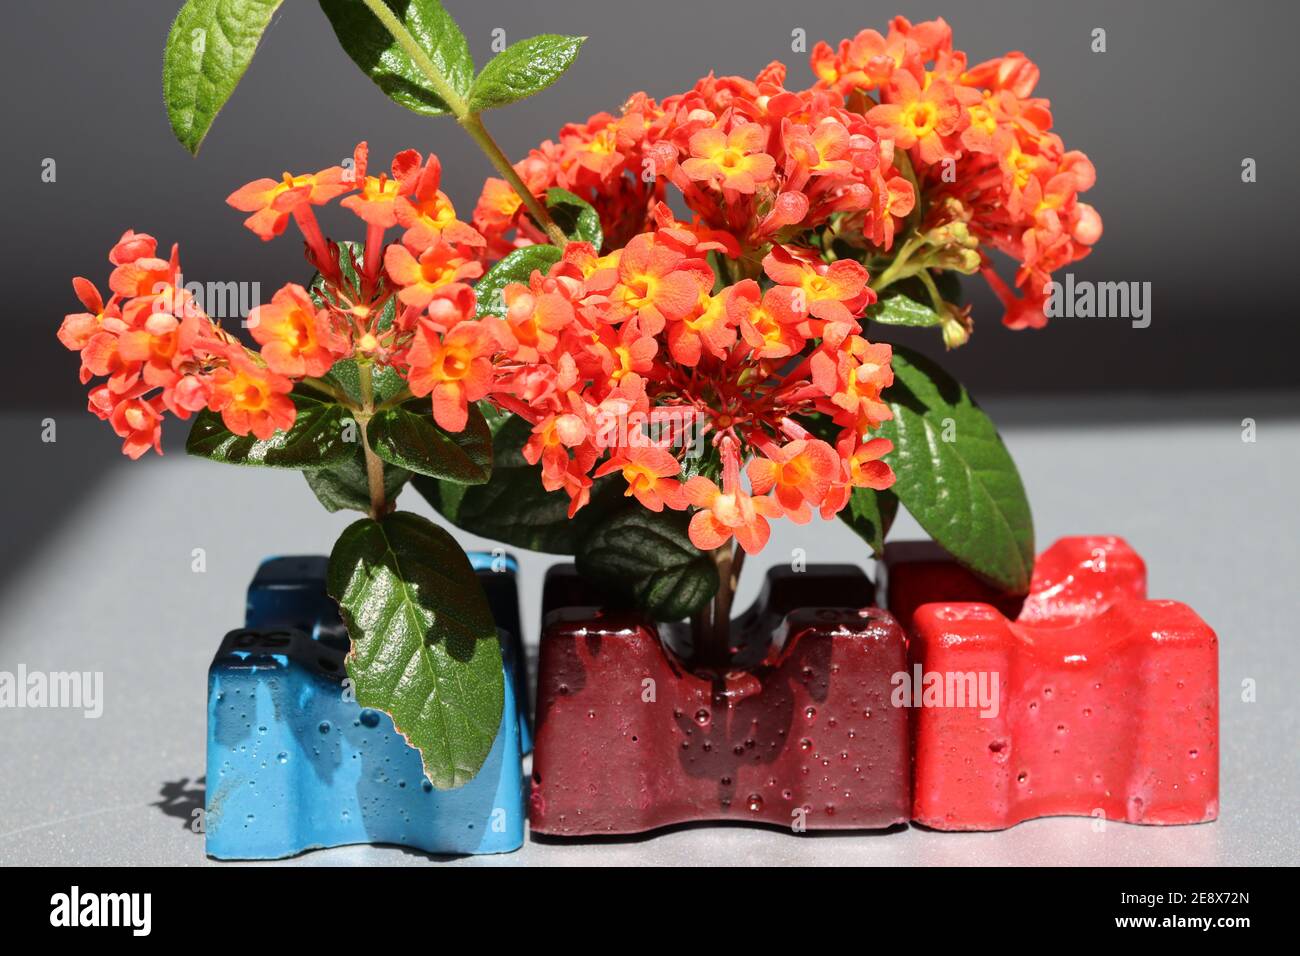 Beautiful red flowers with tiny petals gathering together in an artificial environment. Stock Photo